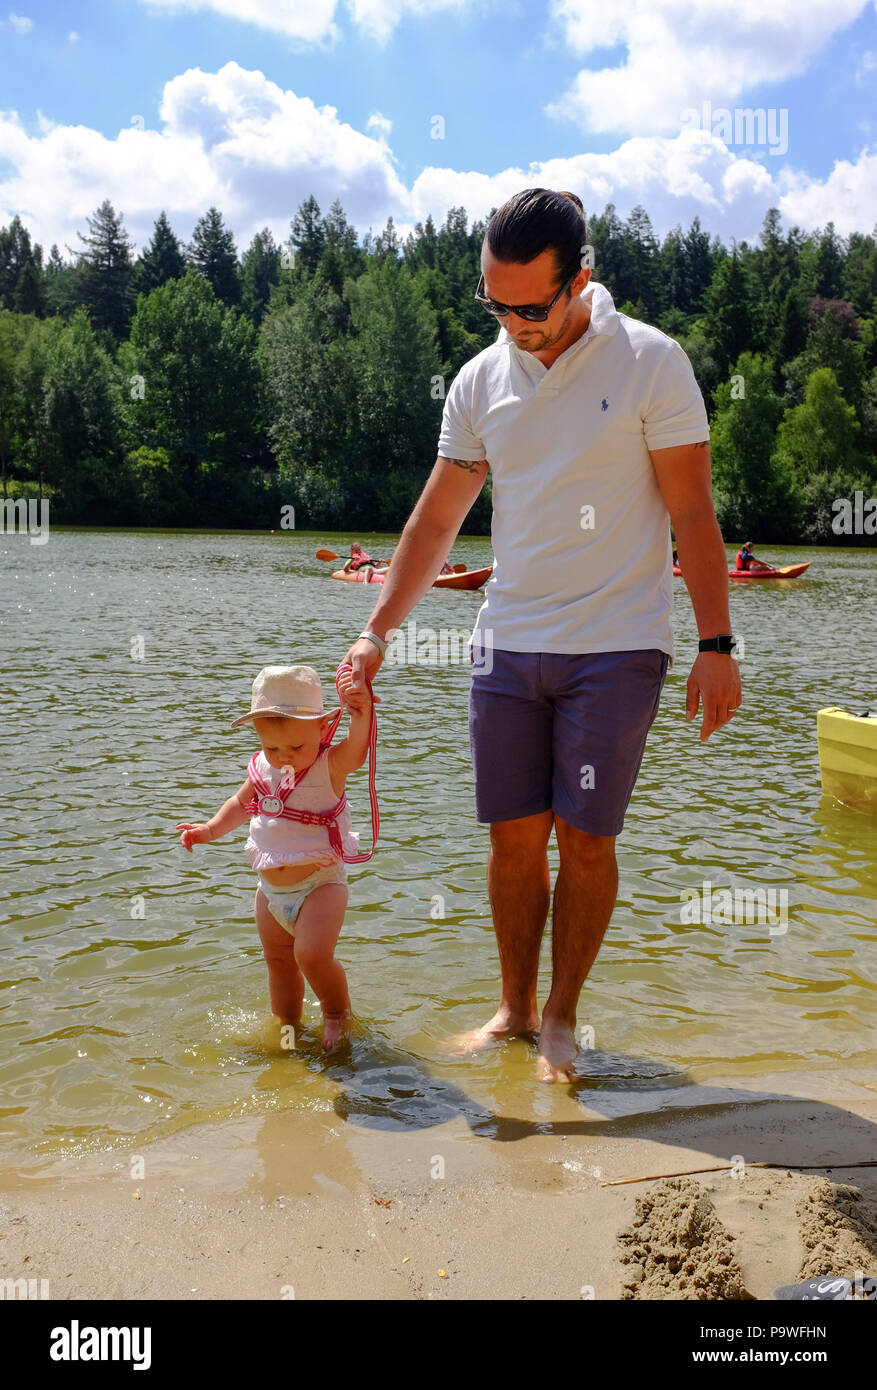 Center Parcs Longleat Forest Wiltshire - Family fun on holiday by the lake Stock Photo